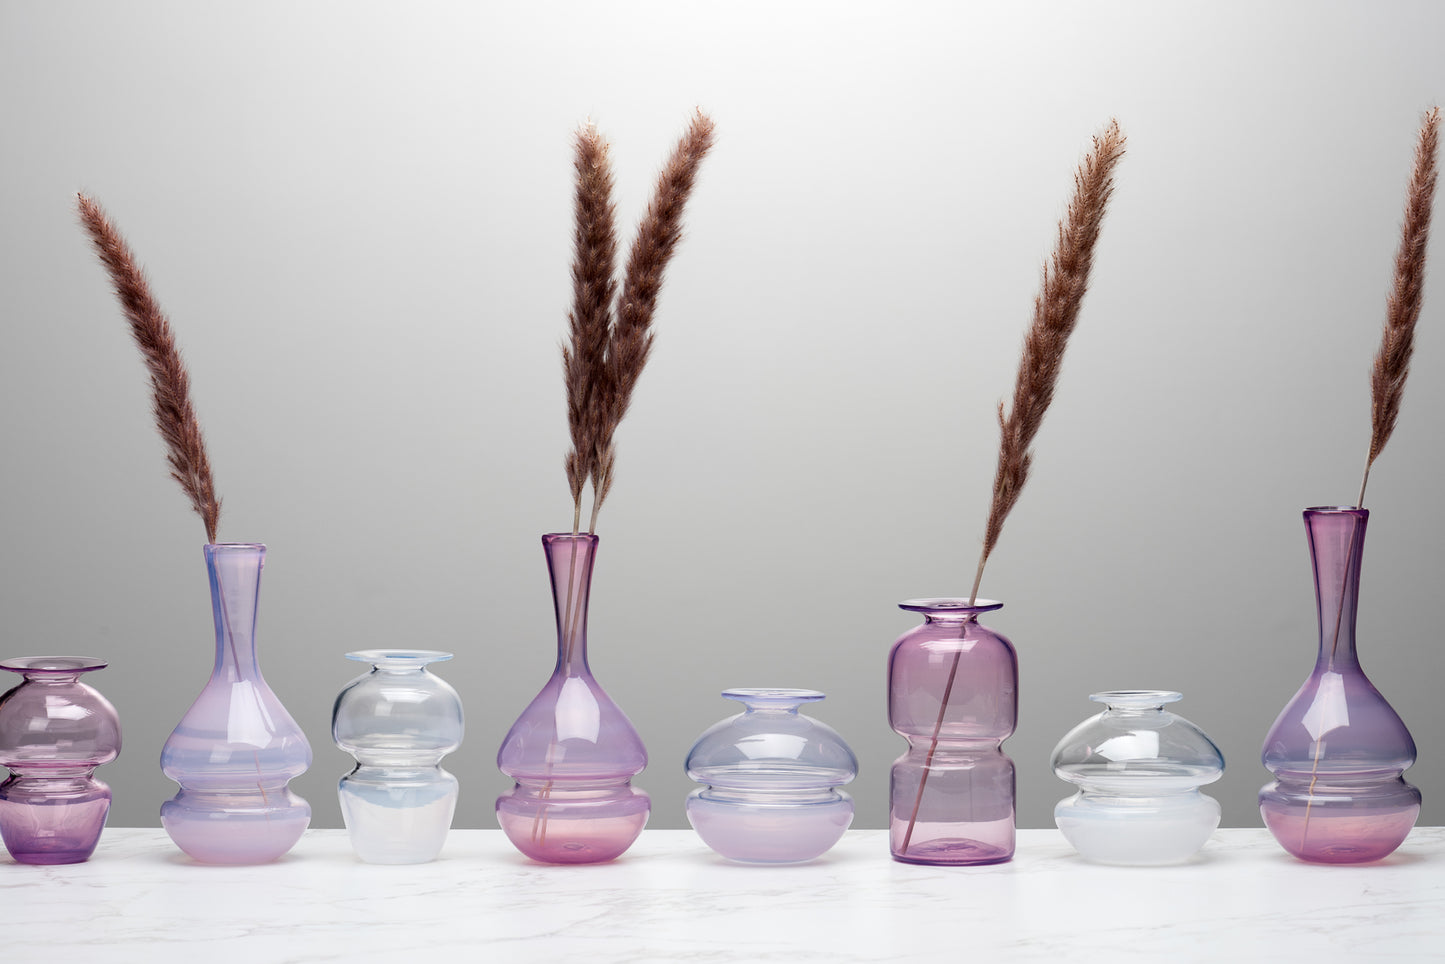 A line-up of pink purple and white bud vases holding grasses. They sit atop a marble table against a grey background. Image by Loam